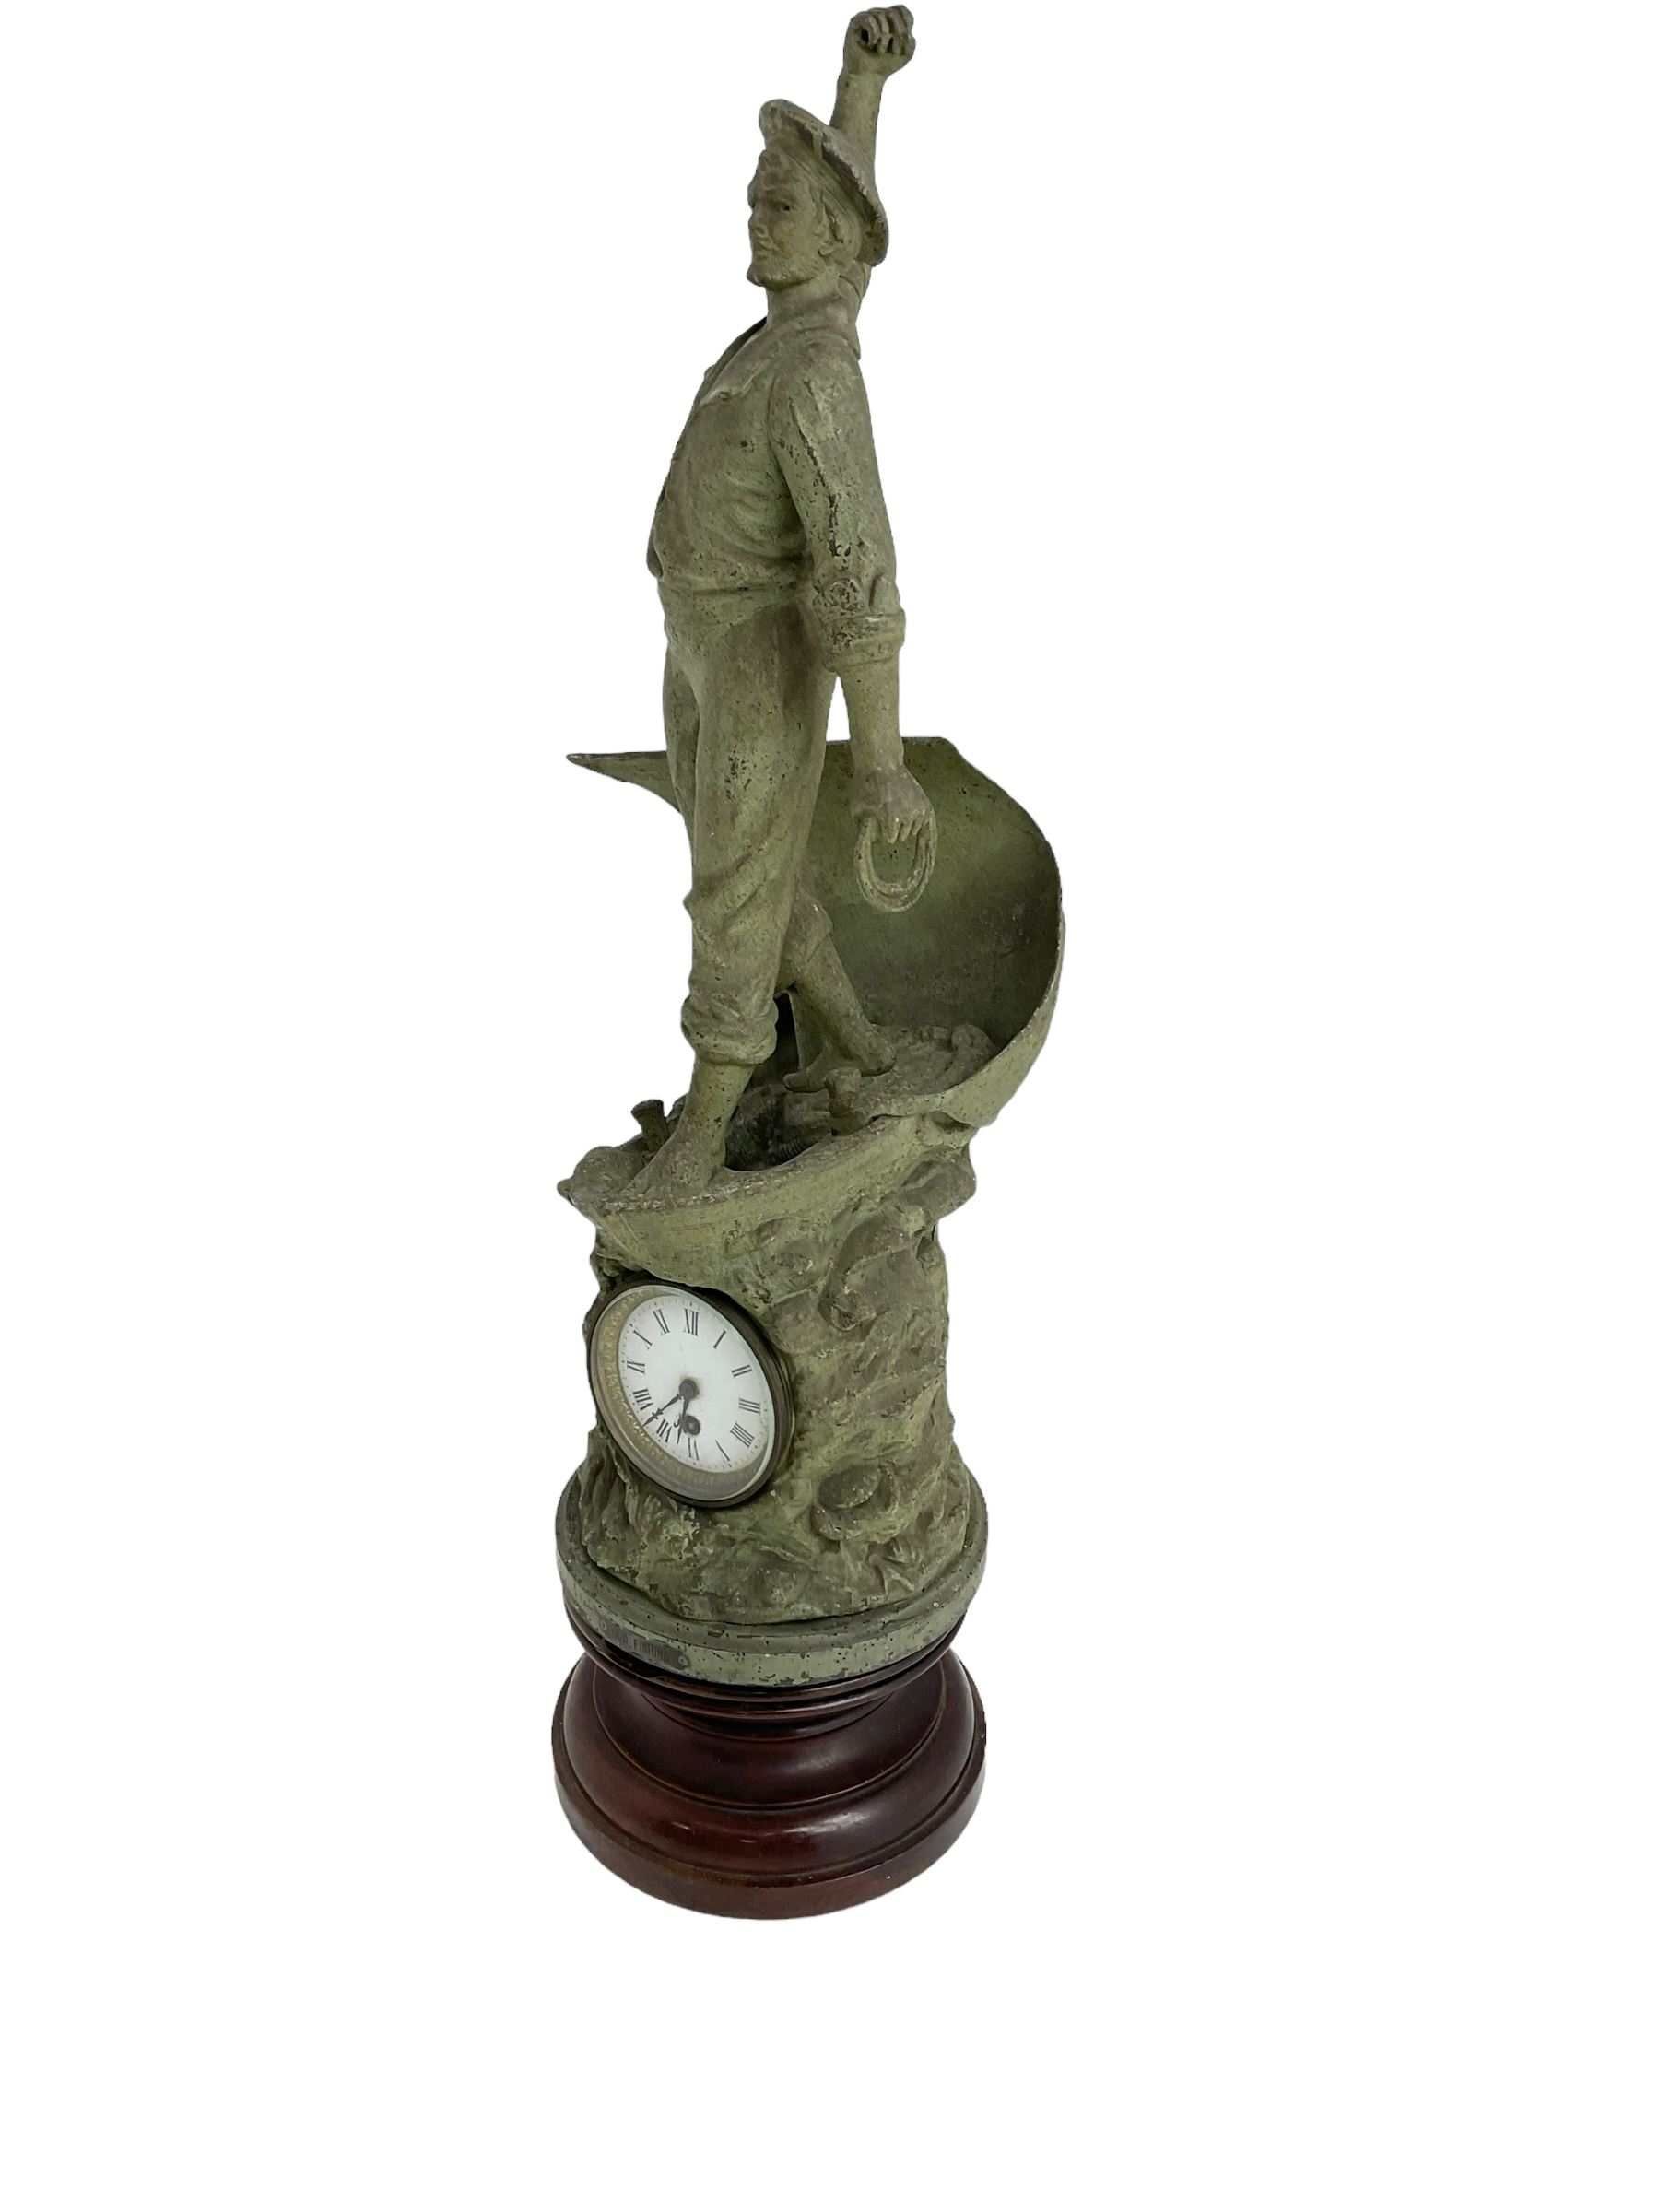 Edwardian - Large figural clock with a Verdigris finish mounted on a mahogany plinth - Image 2 of 4